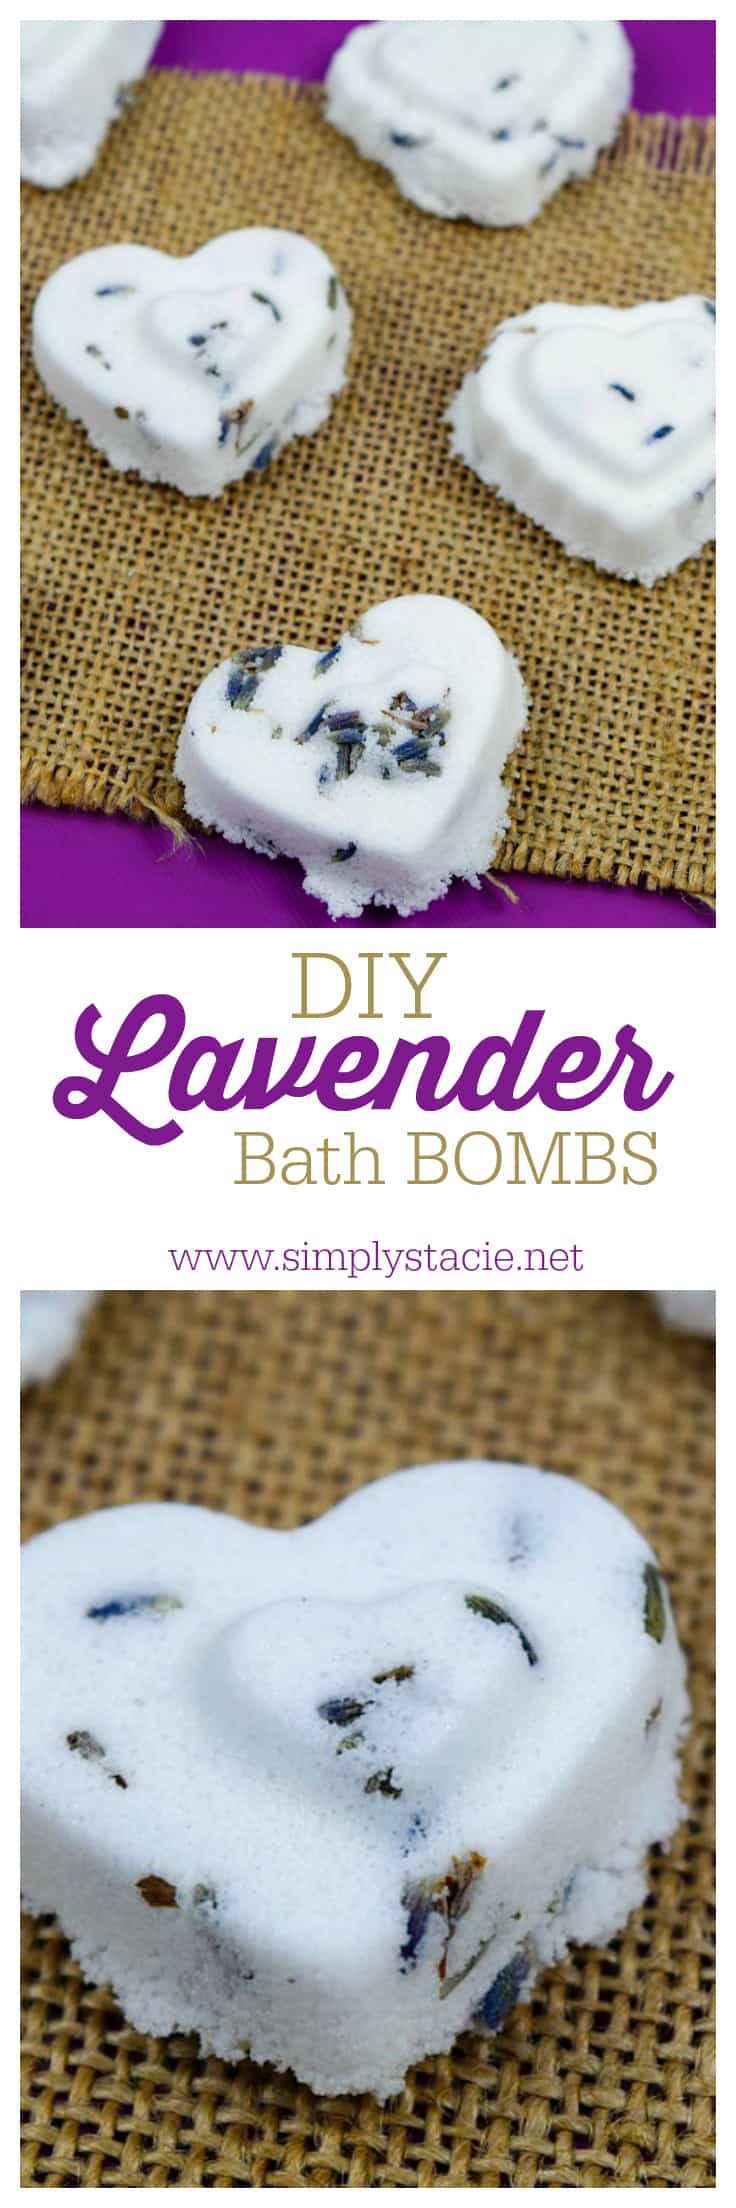 DIY Lavender Bath Bombs - relax the stress away with this simple beauty tutorial. A wonderful gift idea too!